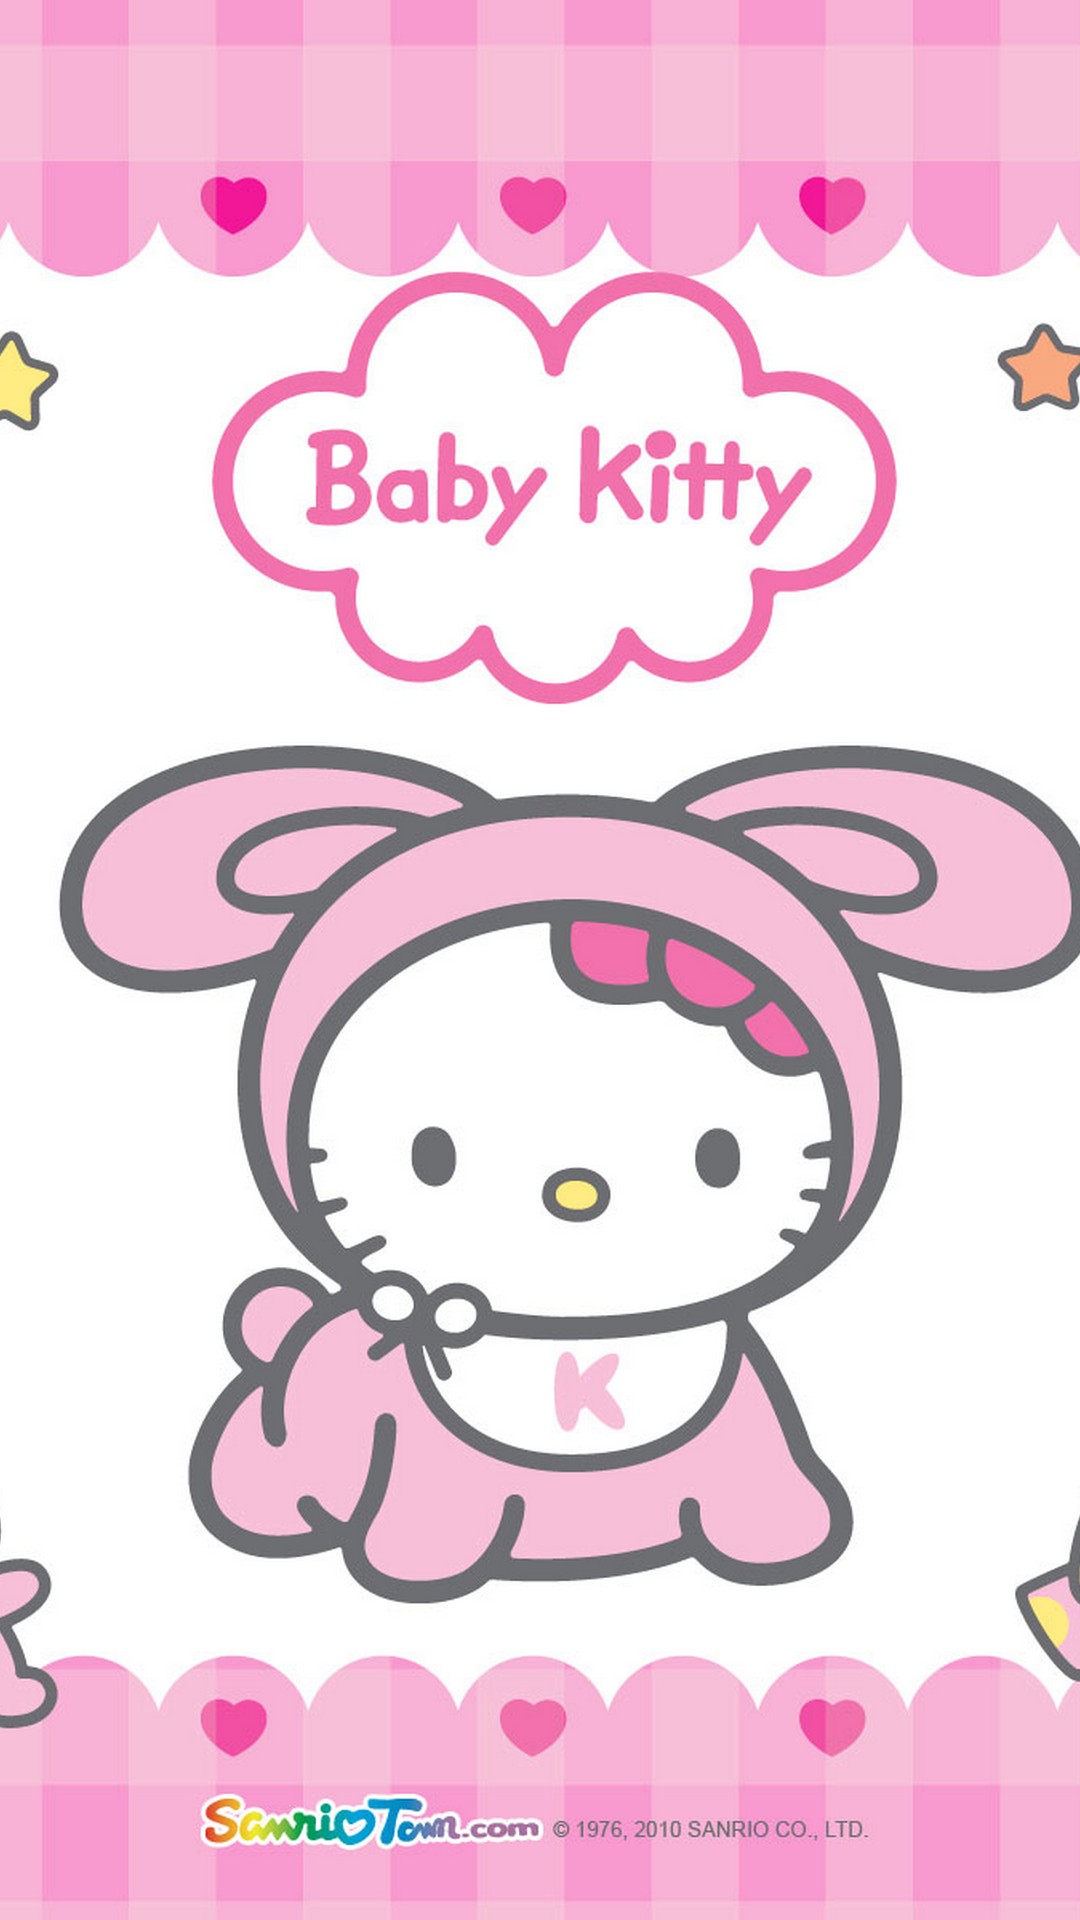 Wallpaper Hello Kitty iPhone with resolution 1080X1920 pixel. You can use this wallpaper as background for your desktop Computer Screensavers, Android or iPhone smartphones